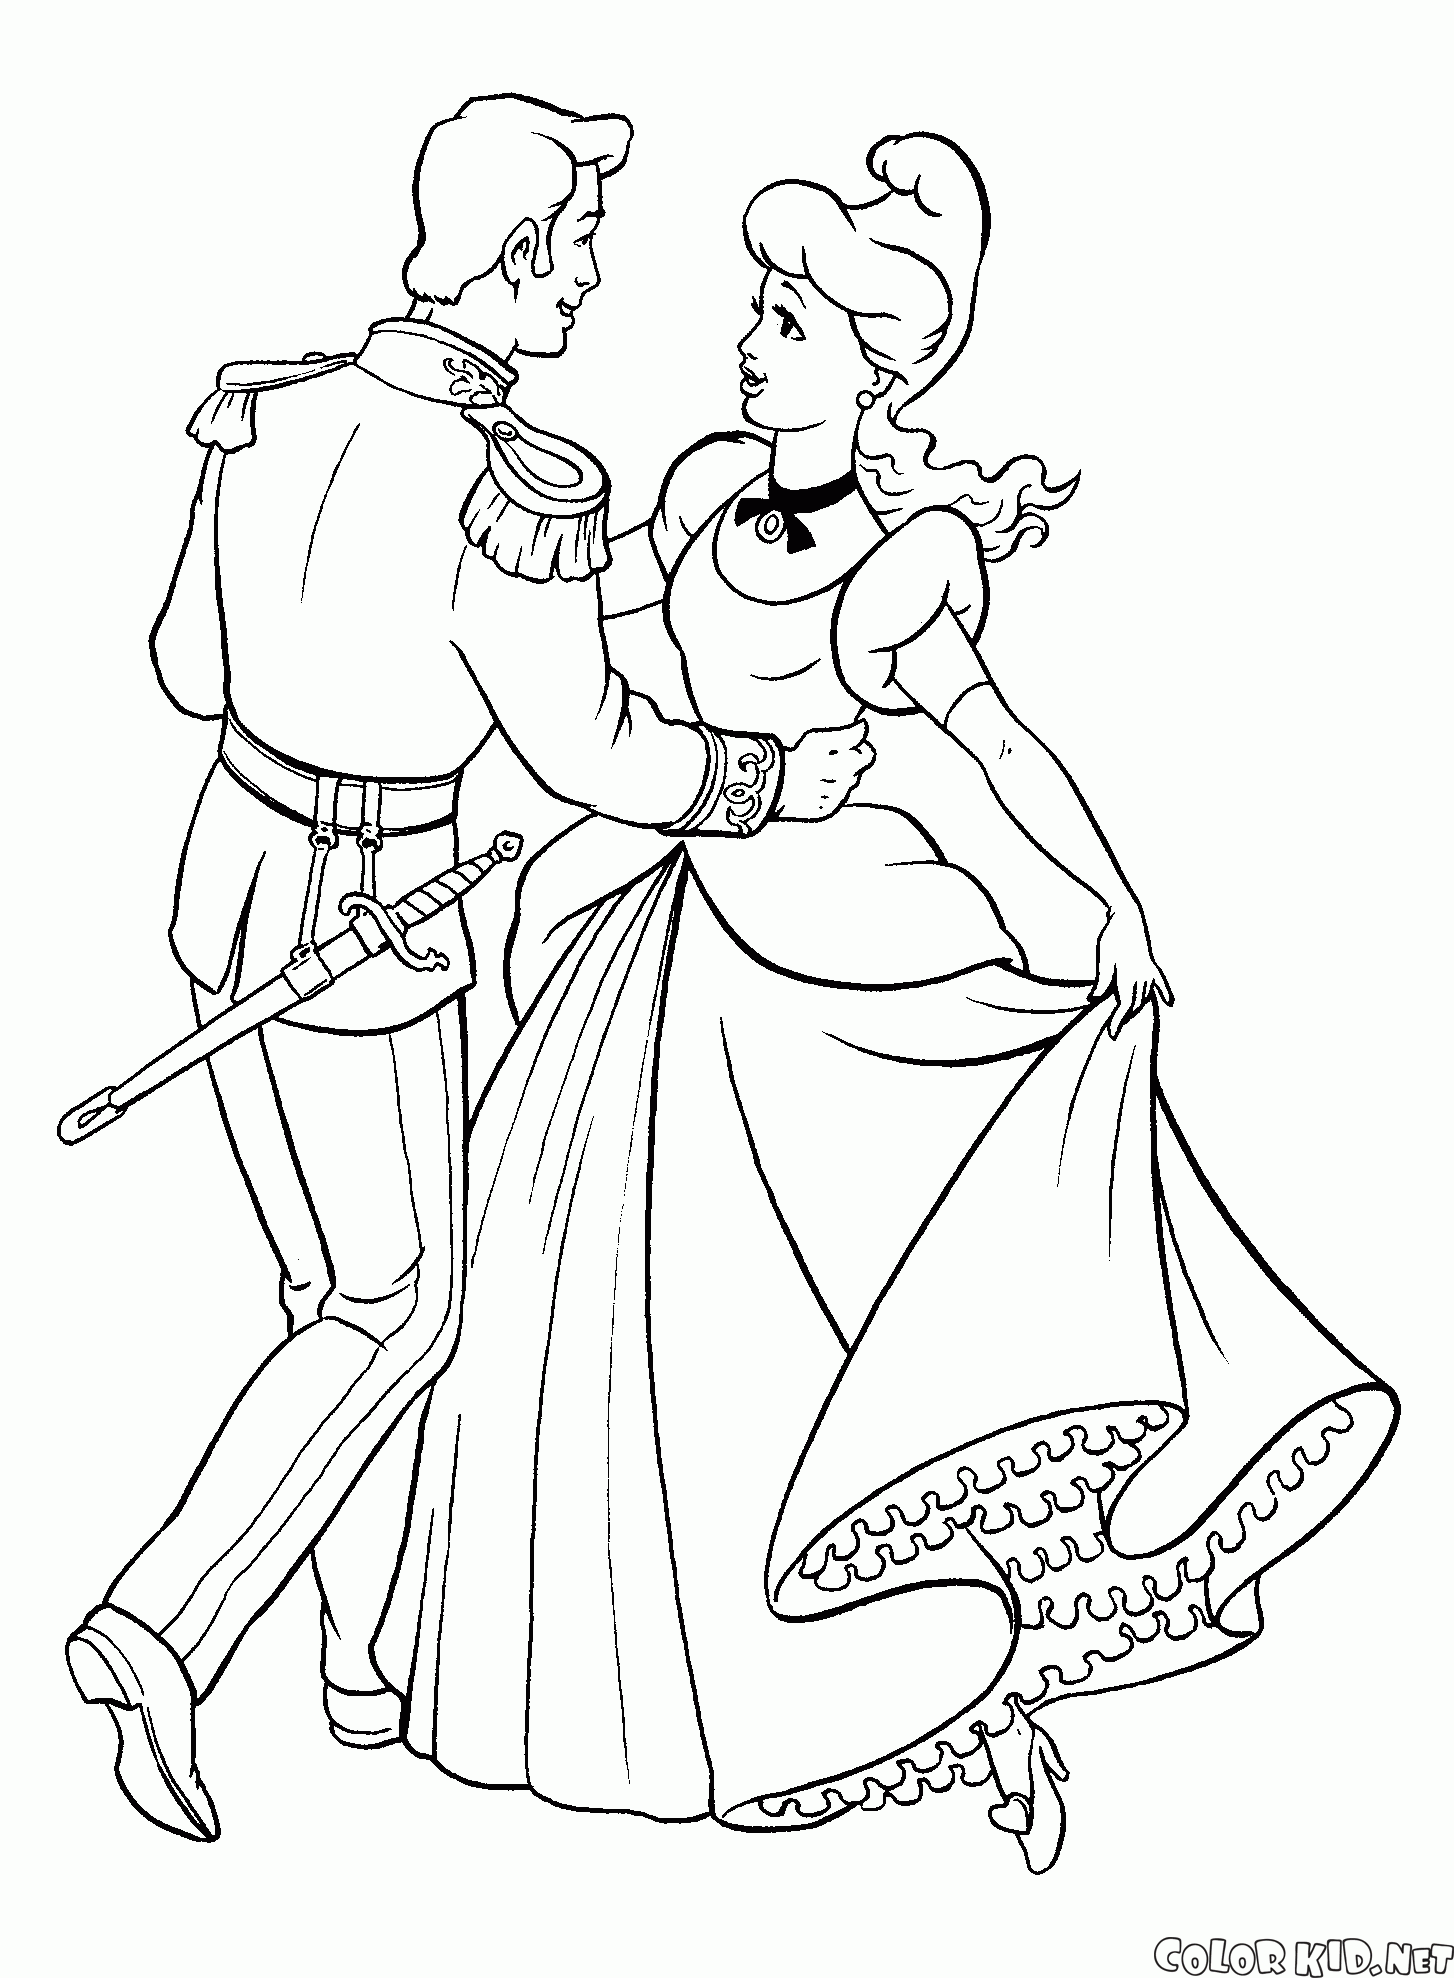 Cinderella and the Prince at the dance